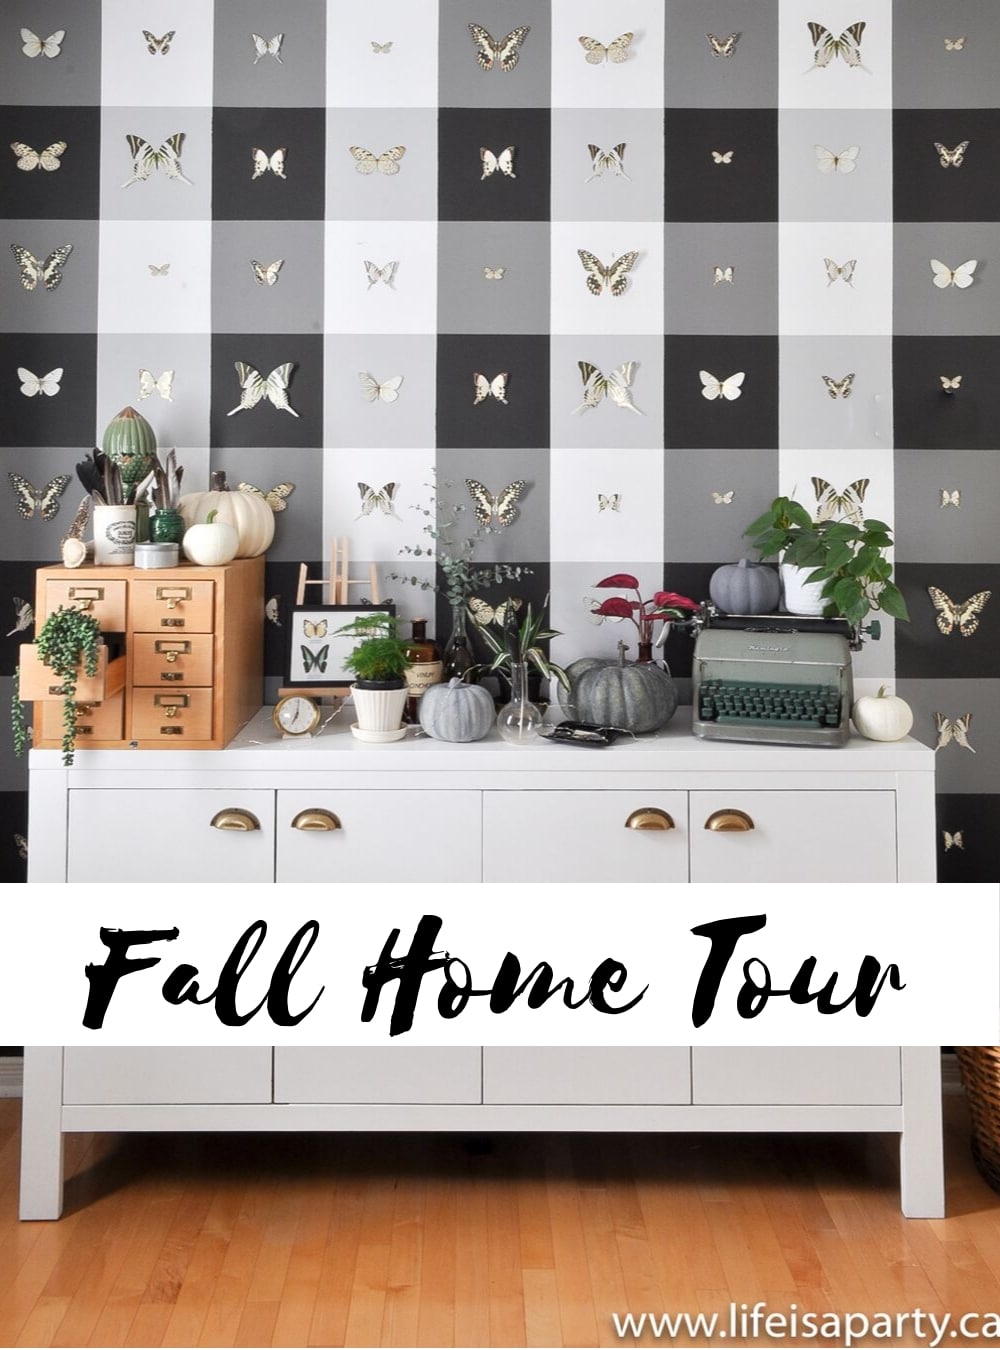 Fall Home Tour: Full of autumn decor ideas for Vintage Botanical Scientific Decor with Boho Maximalist Influence with lots of plants, insects, and pumpkins.